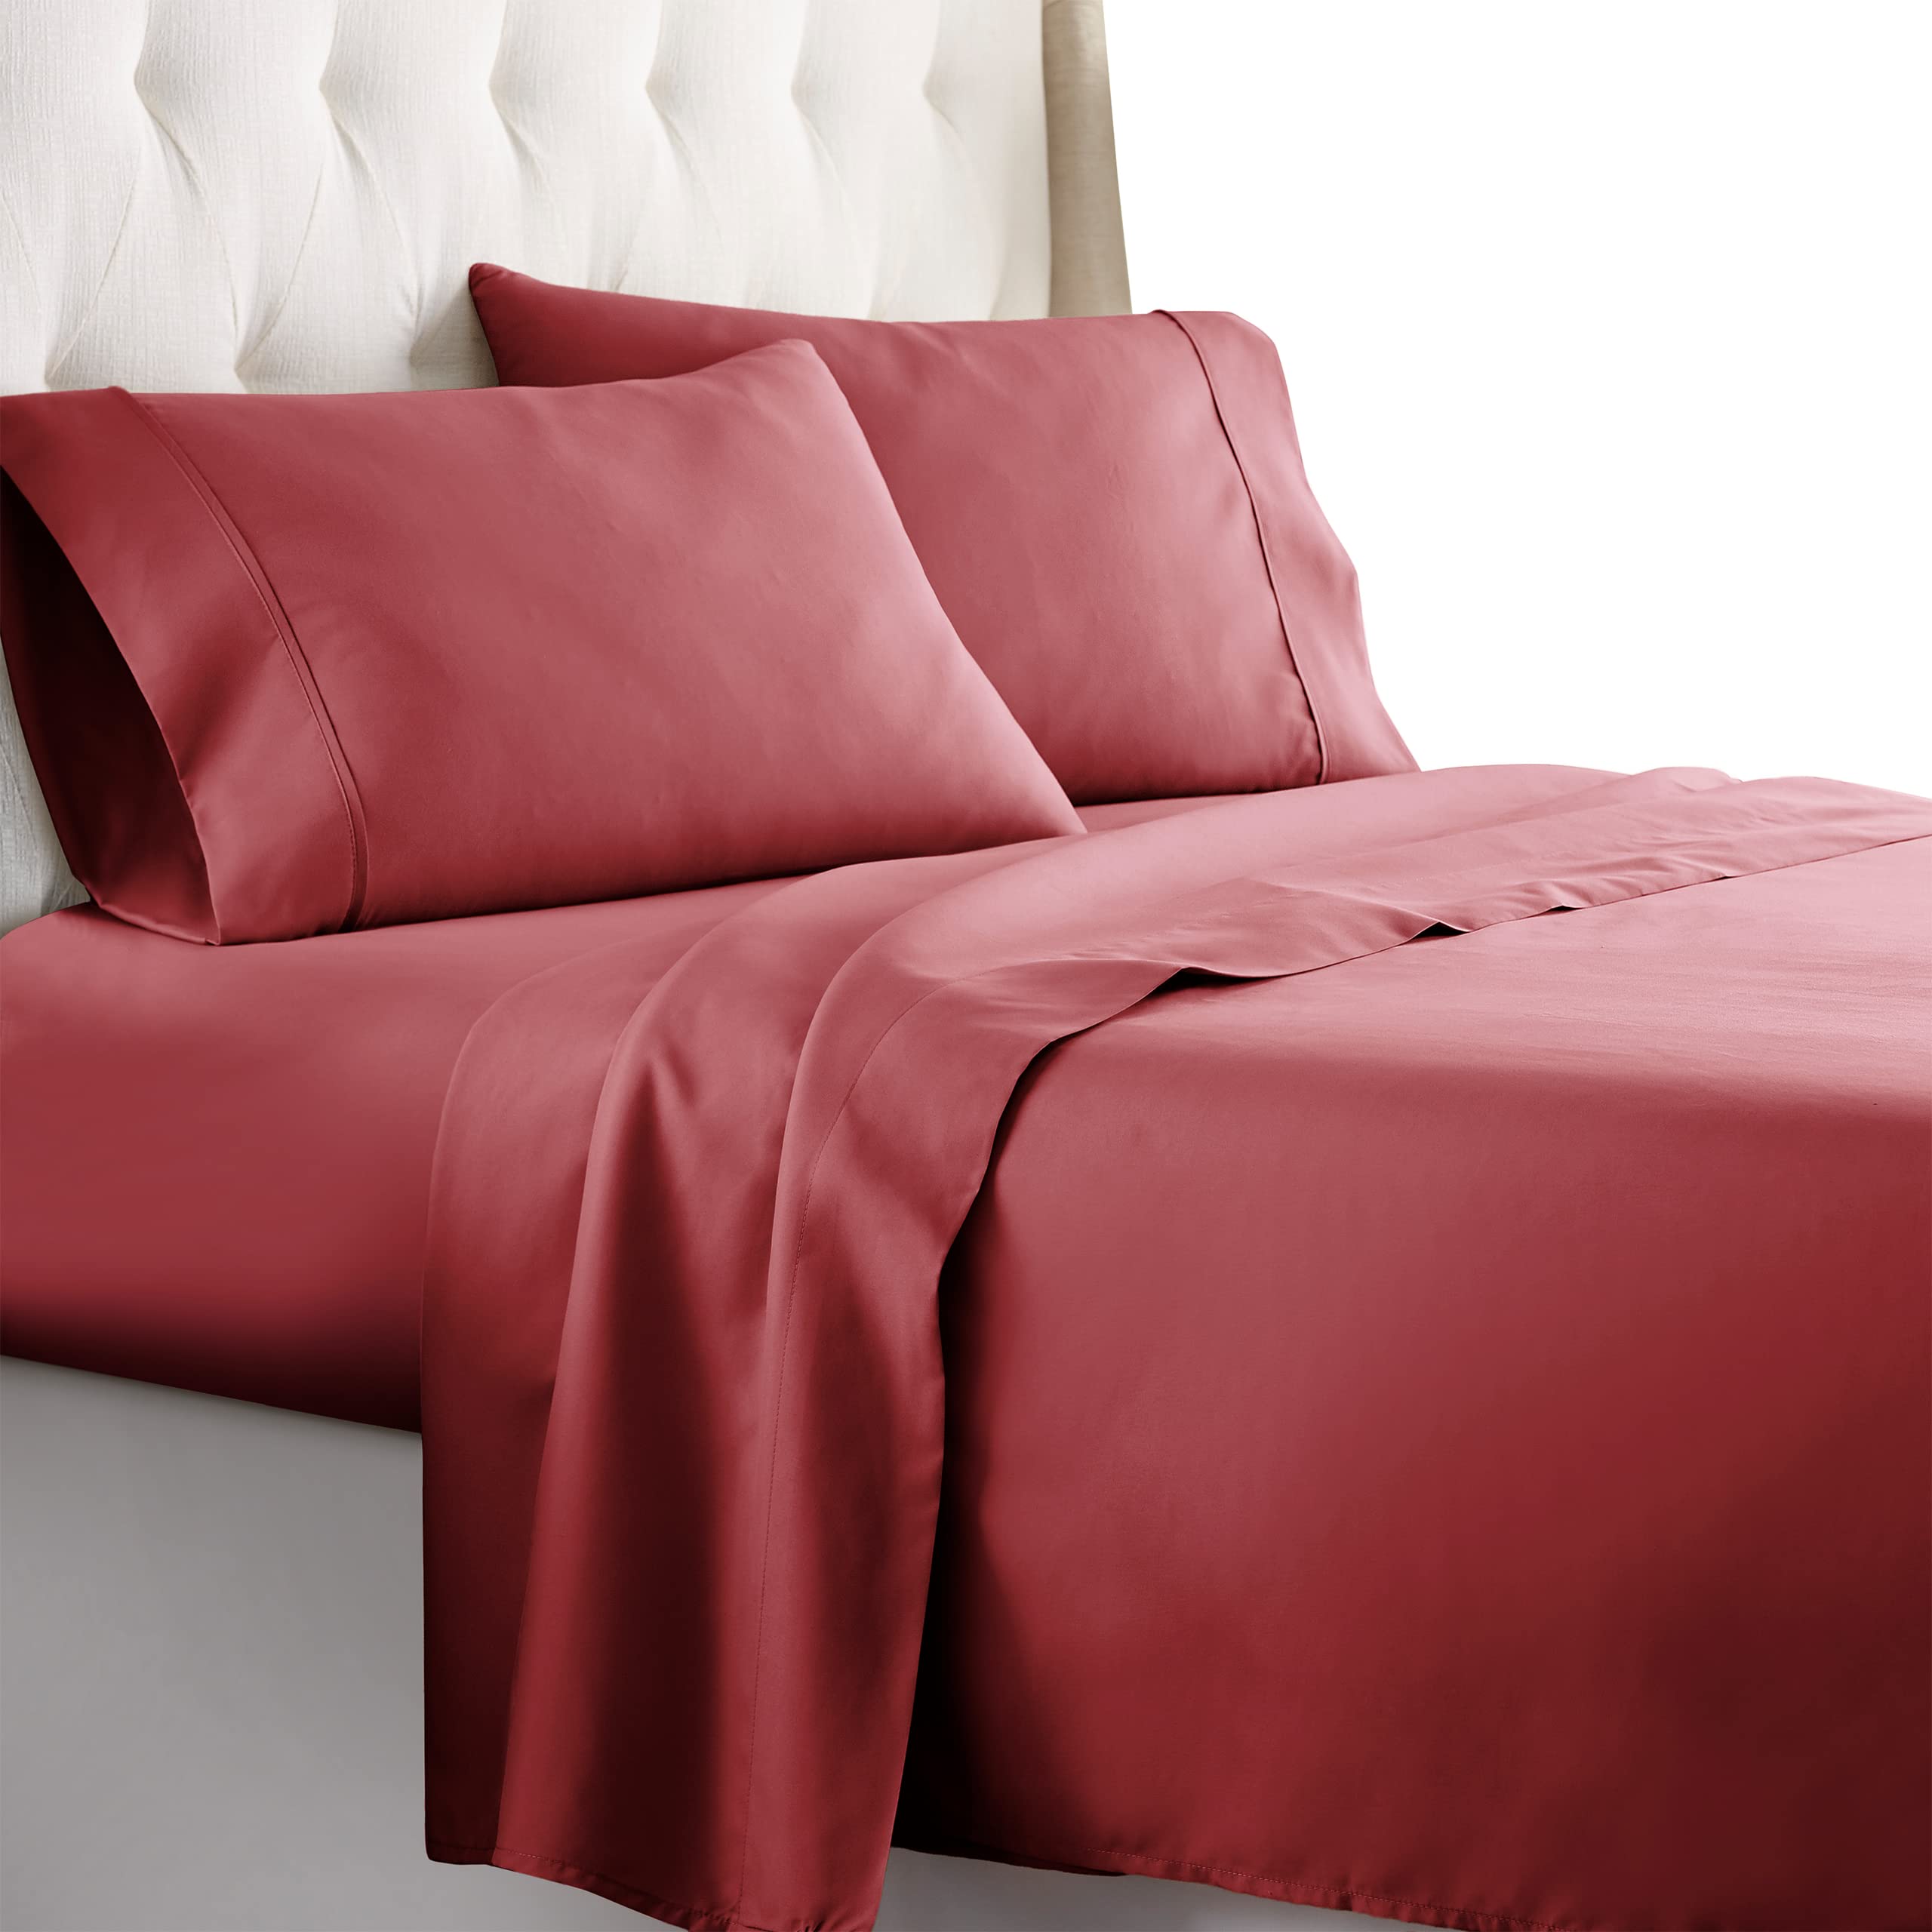 Book Cover HC COLLECTION Queen Bed Sheets Set - Hotel Luxury, Lightweight, Soft Cooling Bedding & Pillowcase Set w/16 Deep Pockets - Wrinkle & Shrink Resistant - Burgundy, Eco-Friendly Queen Size 4 pc Sheet Set Burgundy Queen